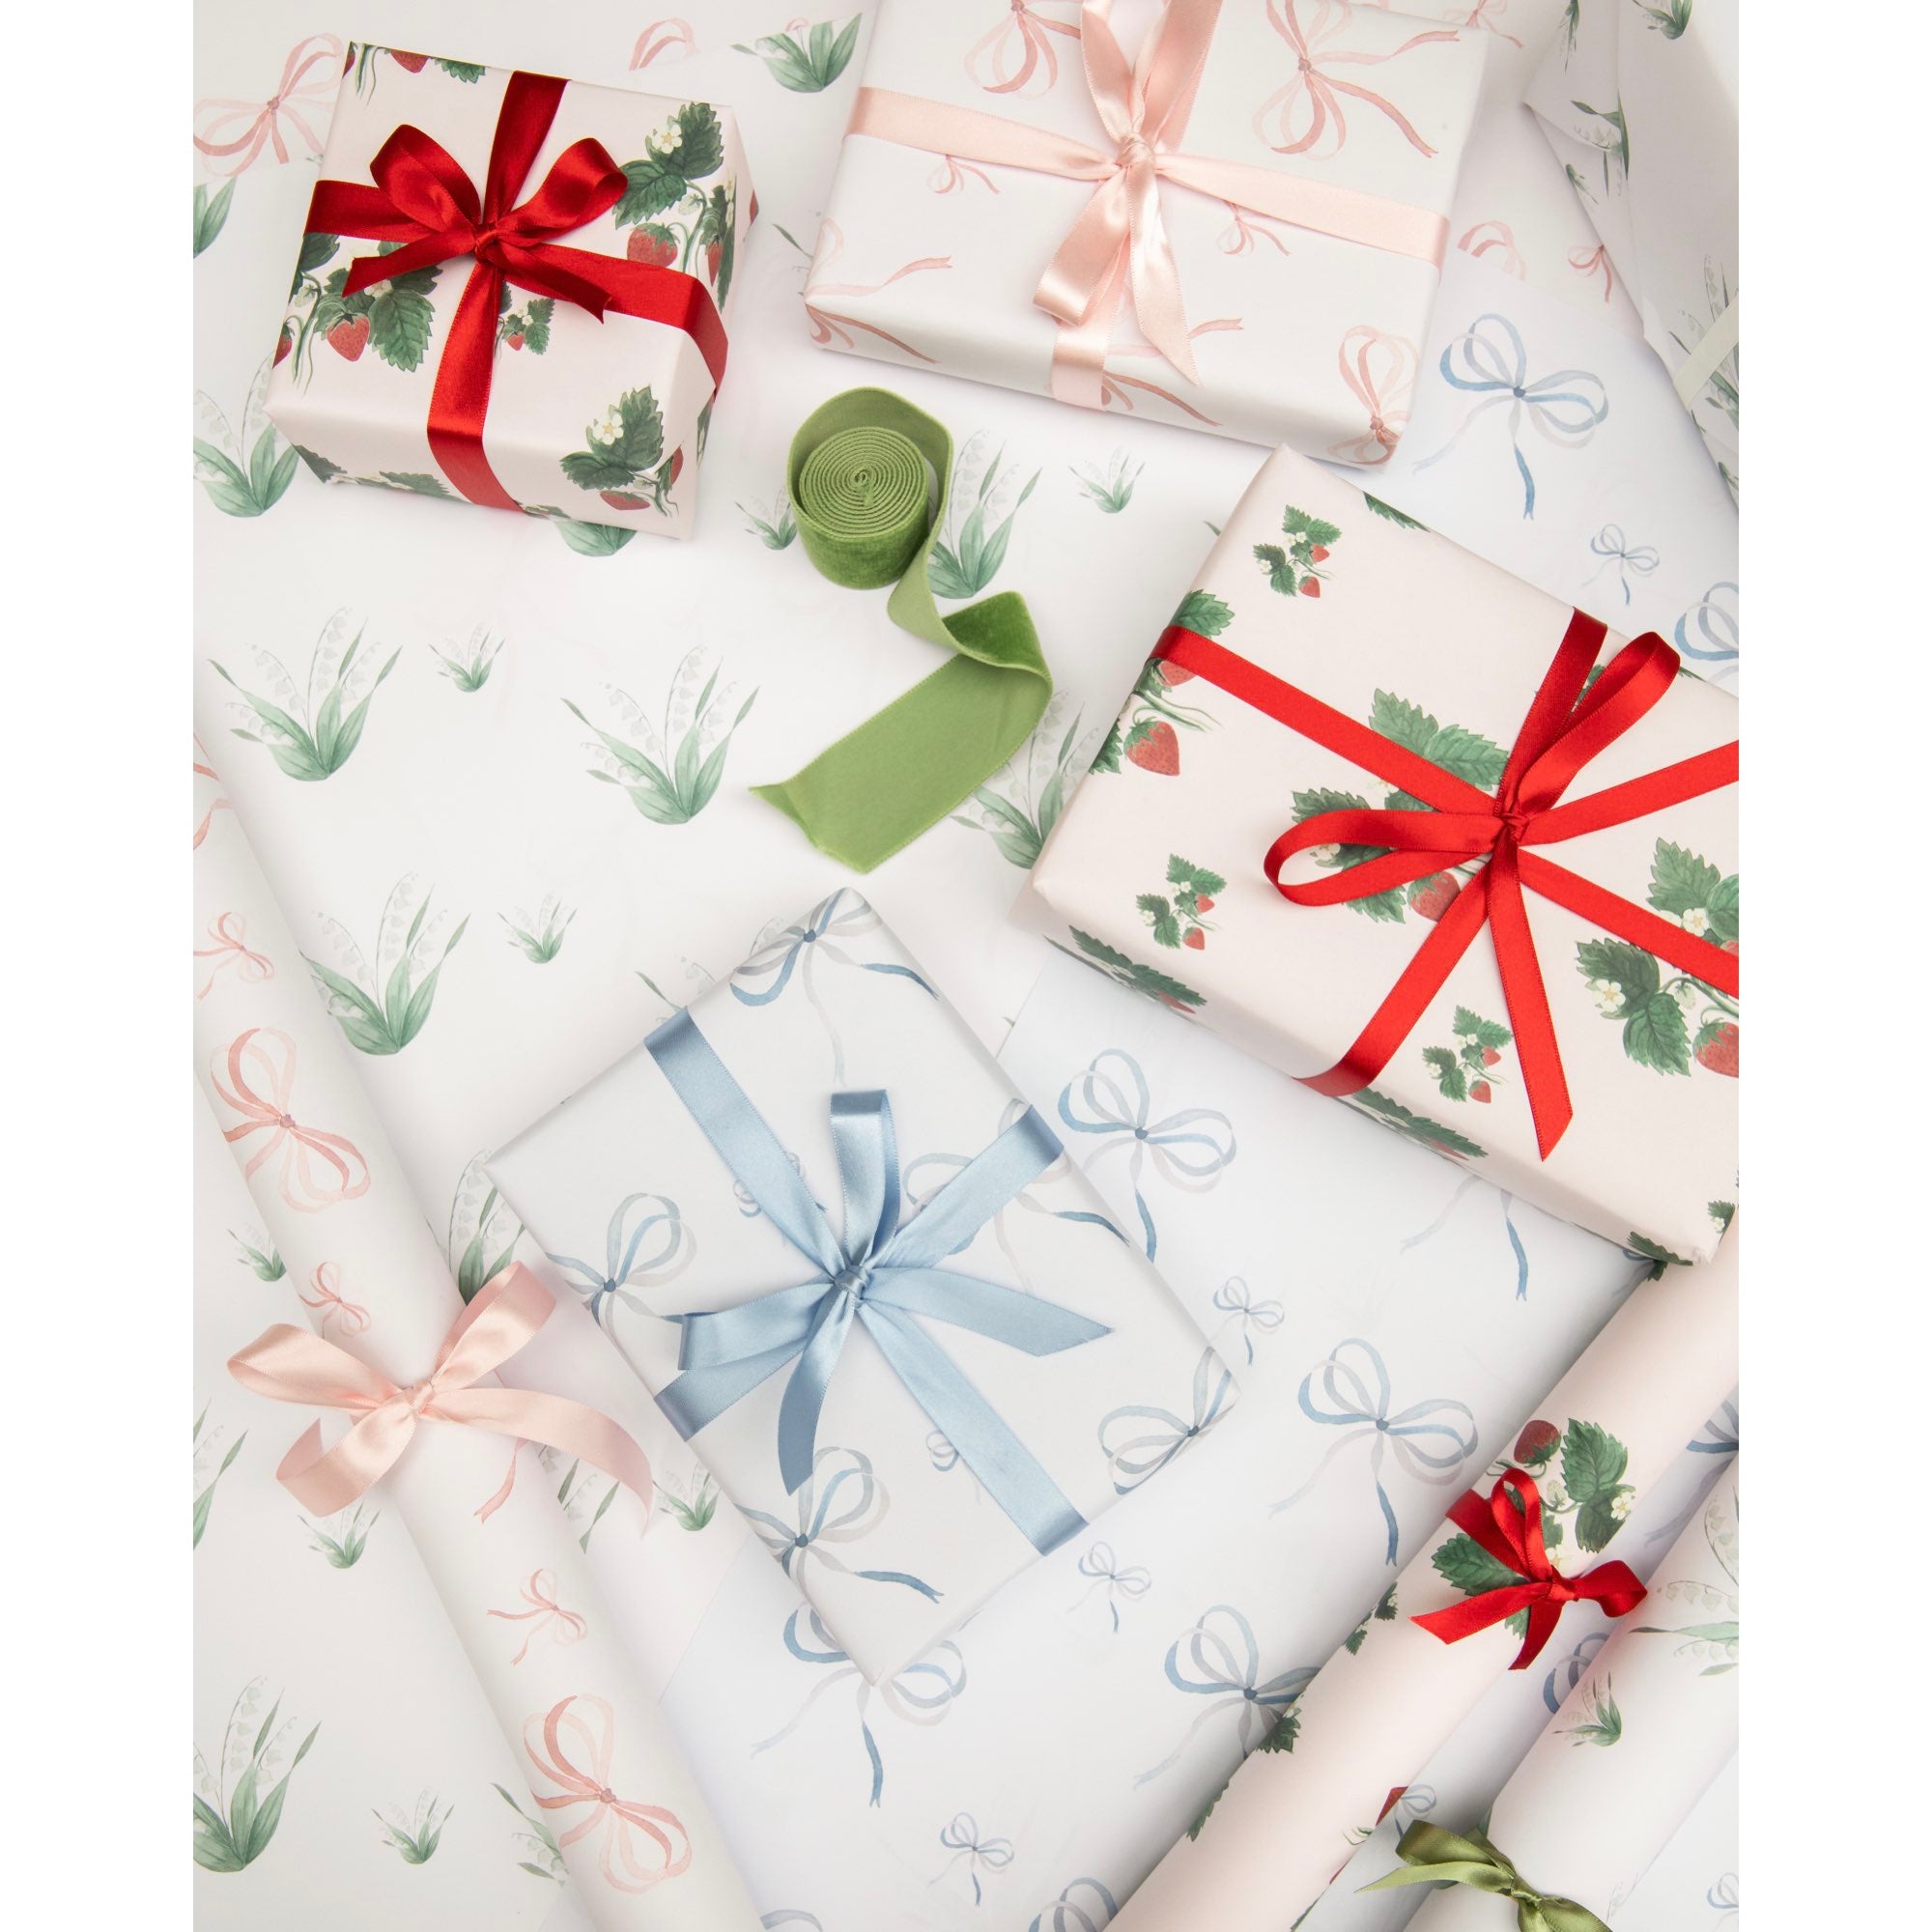 Wrapping paper by Memo Press